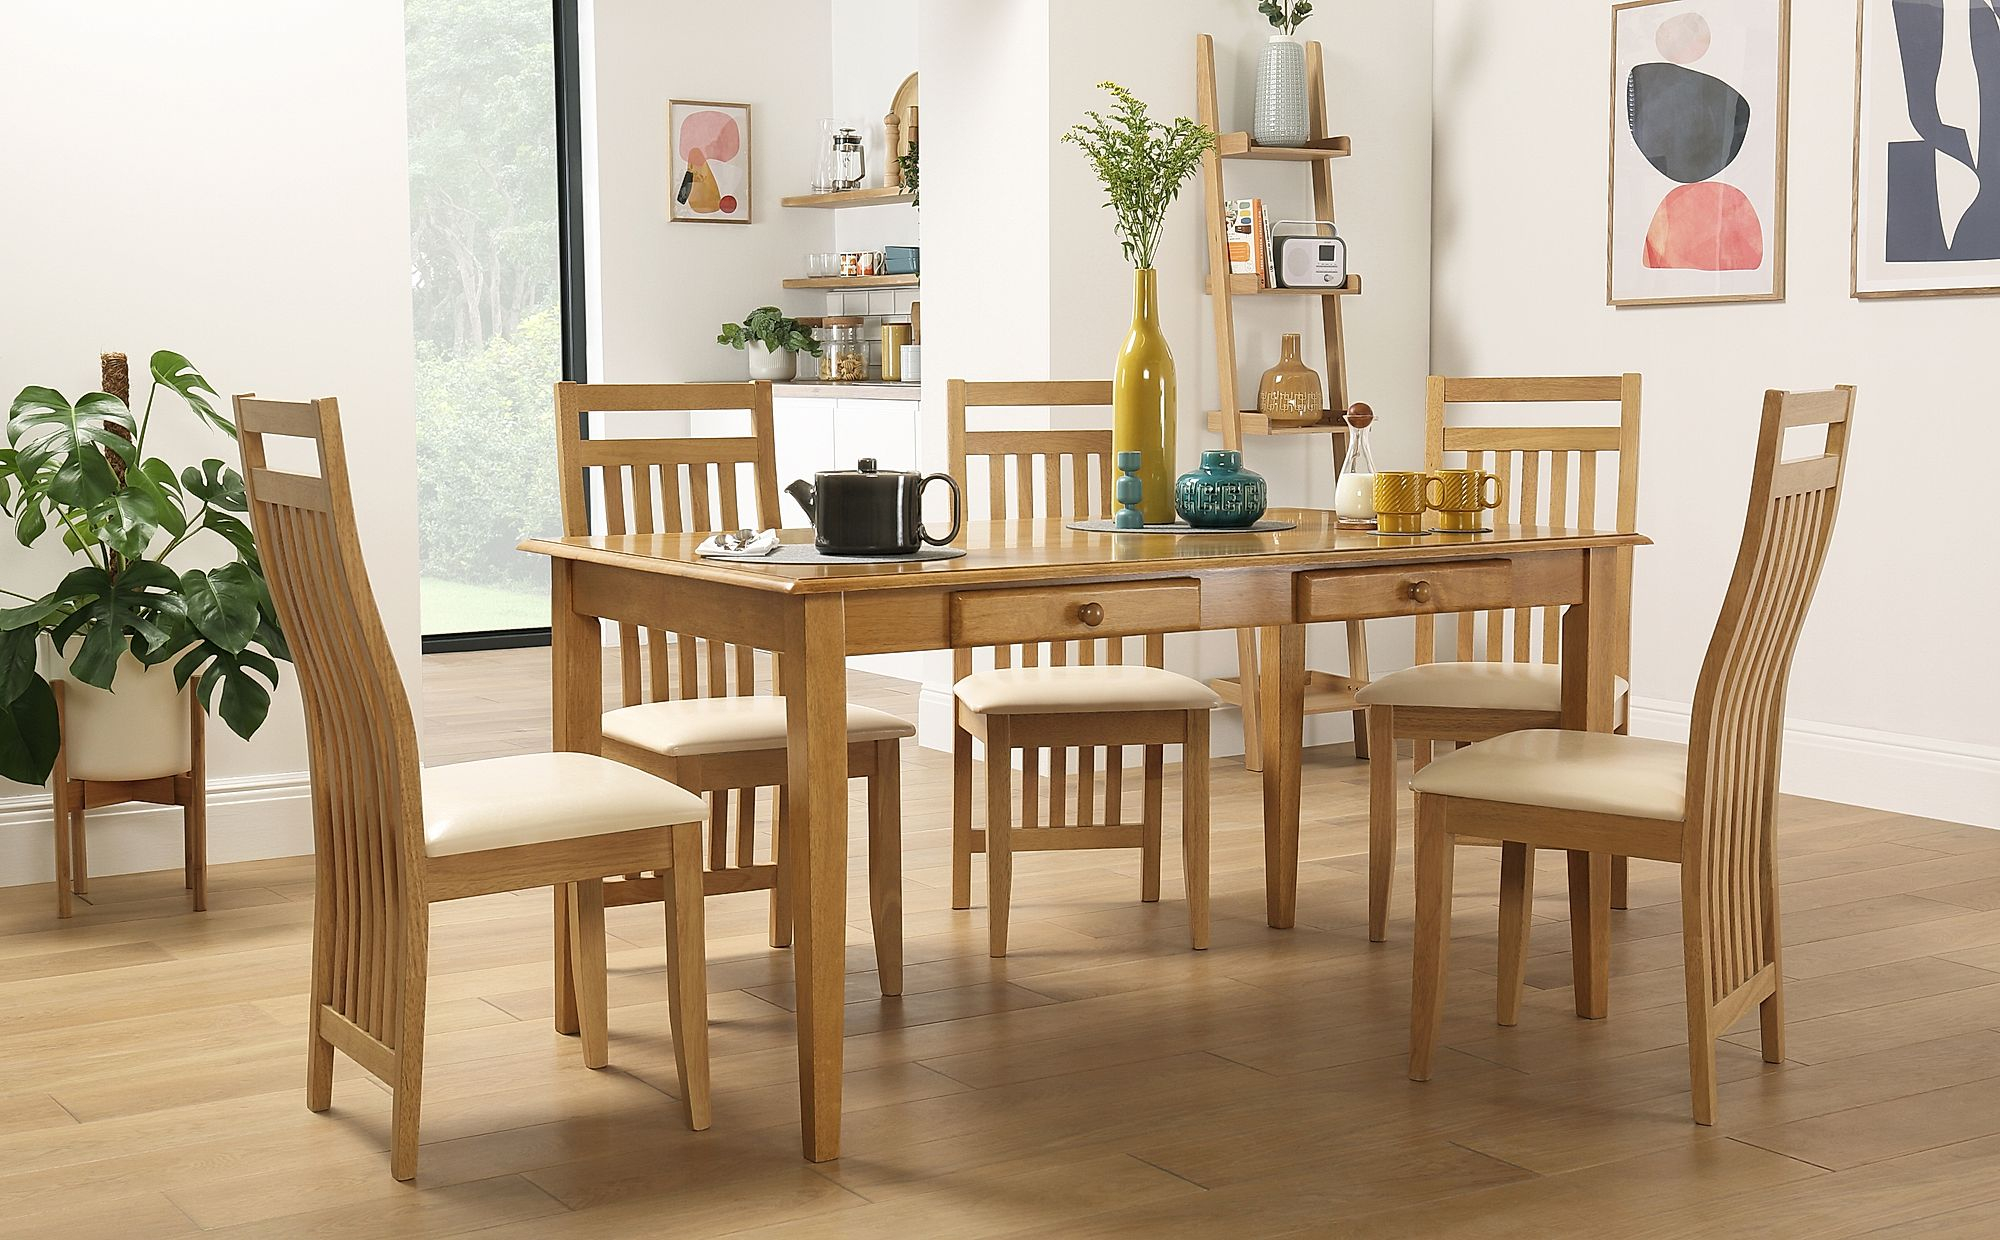 Wiltshire Oak Dining Table With Storage With 4 Bali Chairs Ivory Seat Pad regarding sizing 2000 X 1240